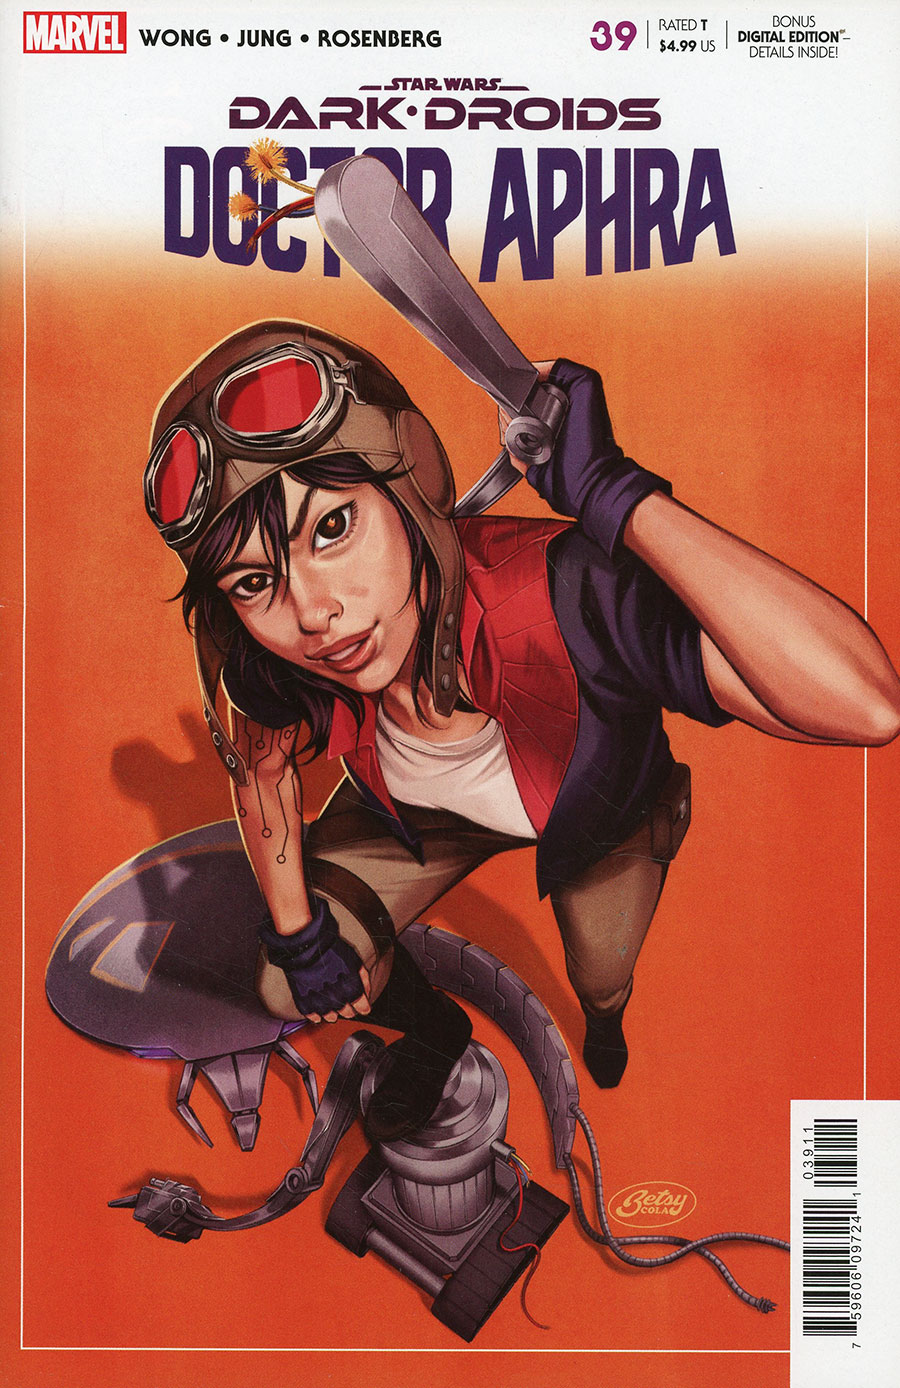 Star Wars Doctor Aphra Vol 2 #39 Cover A Regular Betsy Cola Cover (Dark Droids Tie-In) (Limit 1 Per Customer)